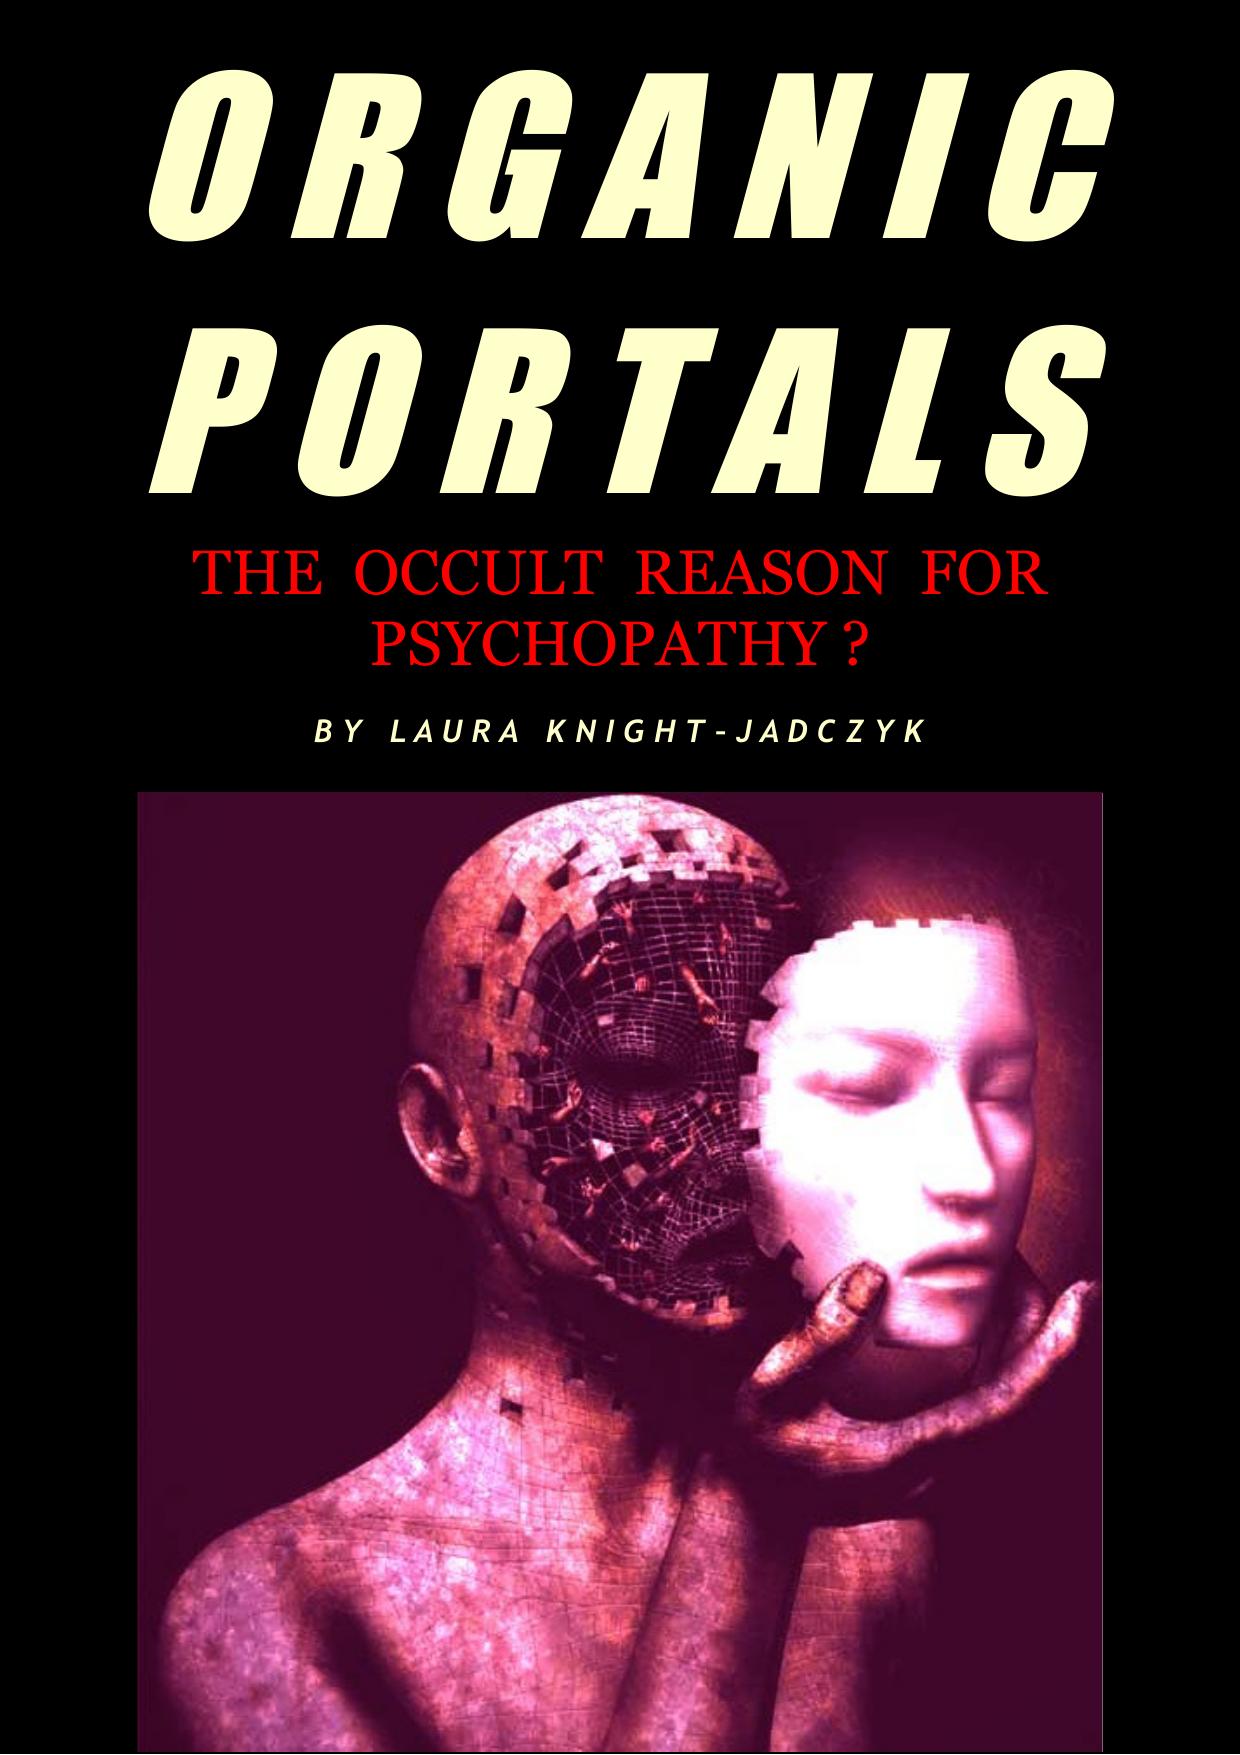 Organic Portals - The Occult Reason for Psychopathy